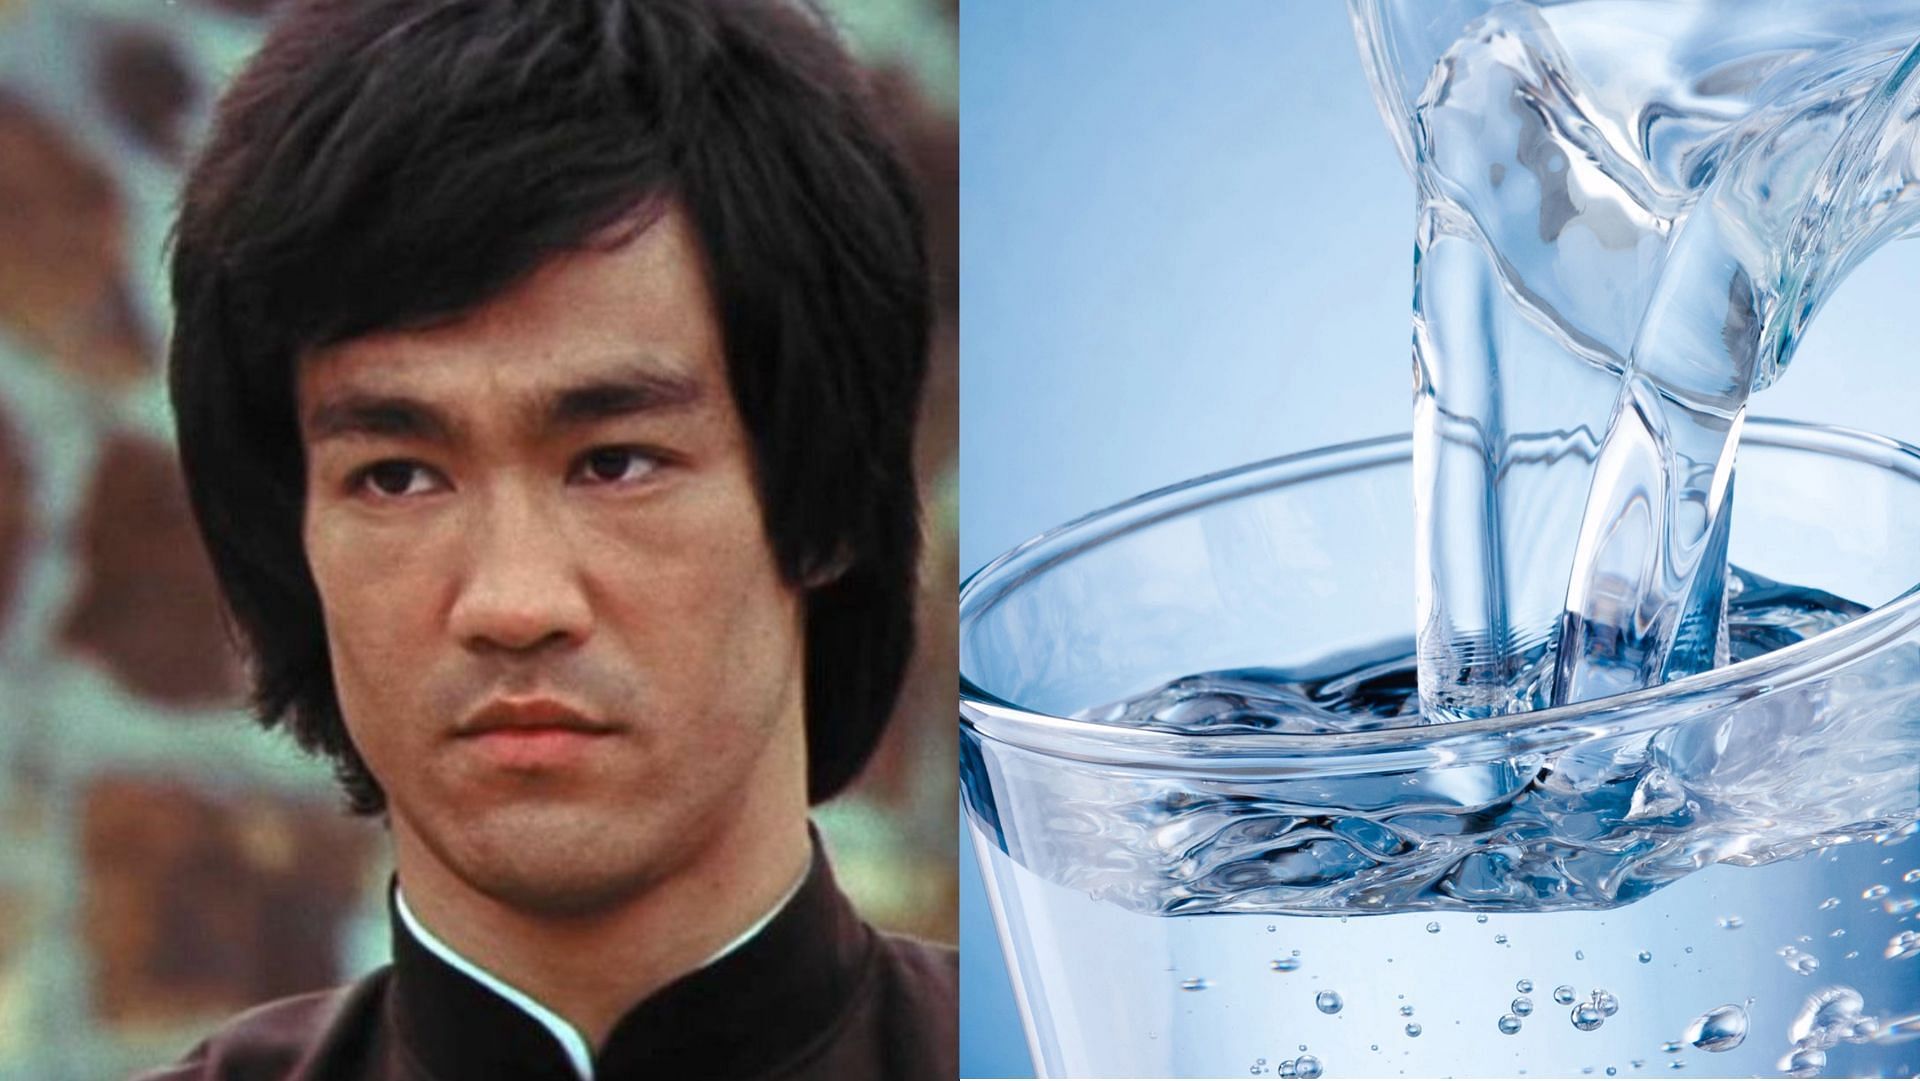 A new research finds, drinking too much water killed Bruce Lee